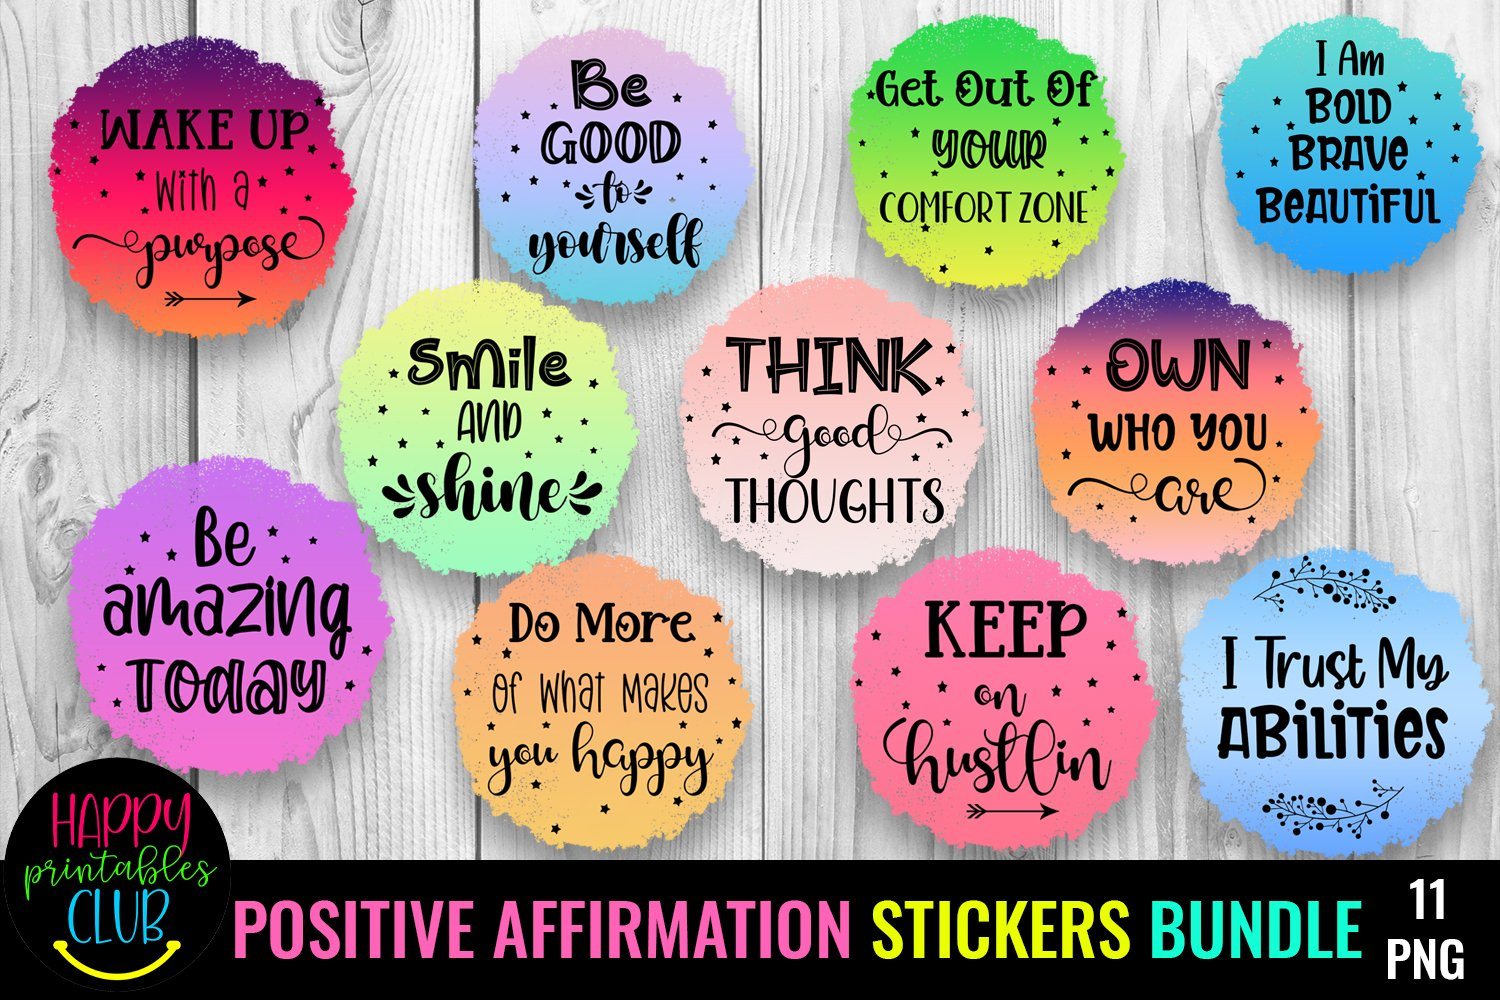 Encouraging Stickers - Free miscellaneous Stickers